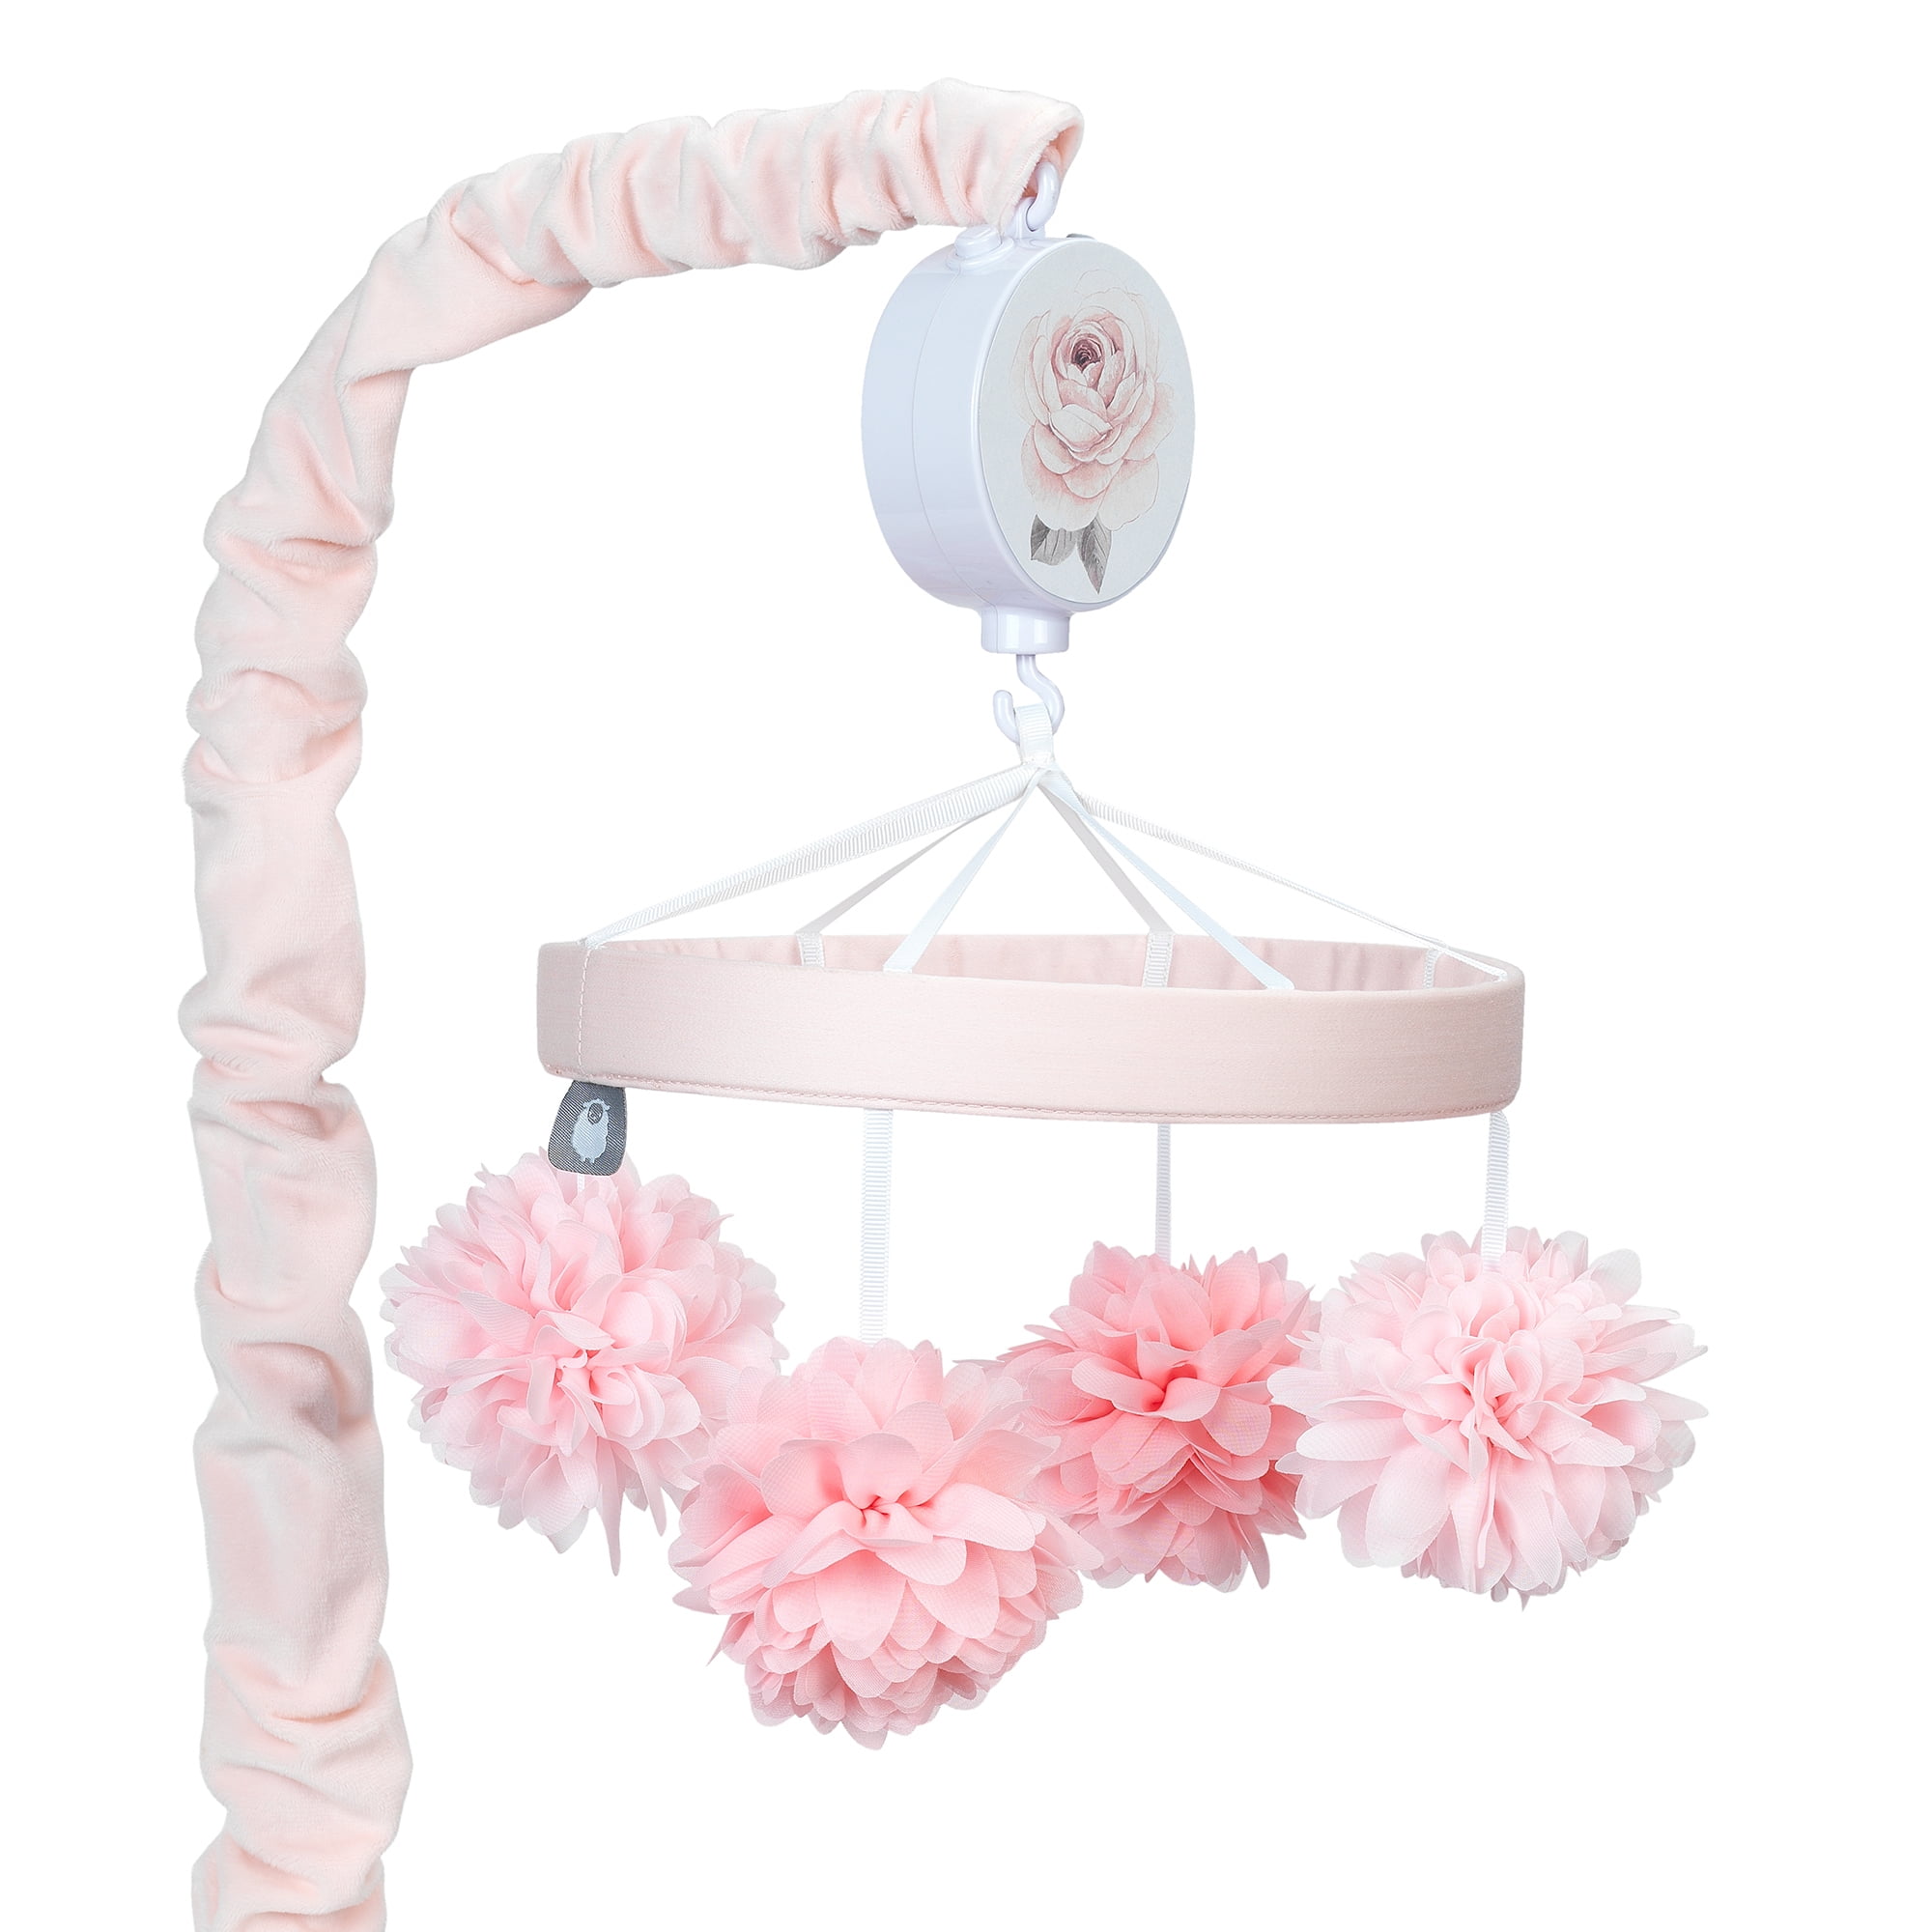 Baby's mobile - Pink and White - The Blooming Design